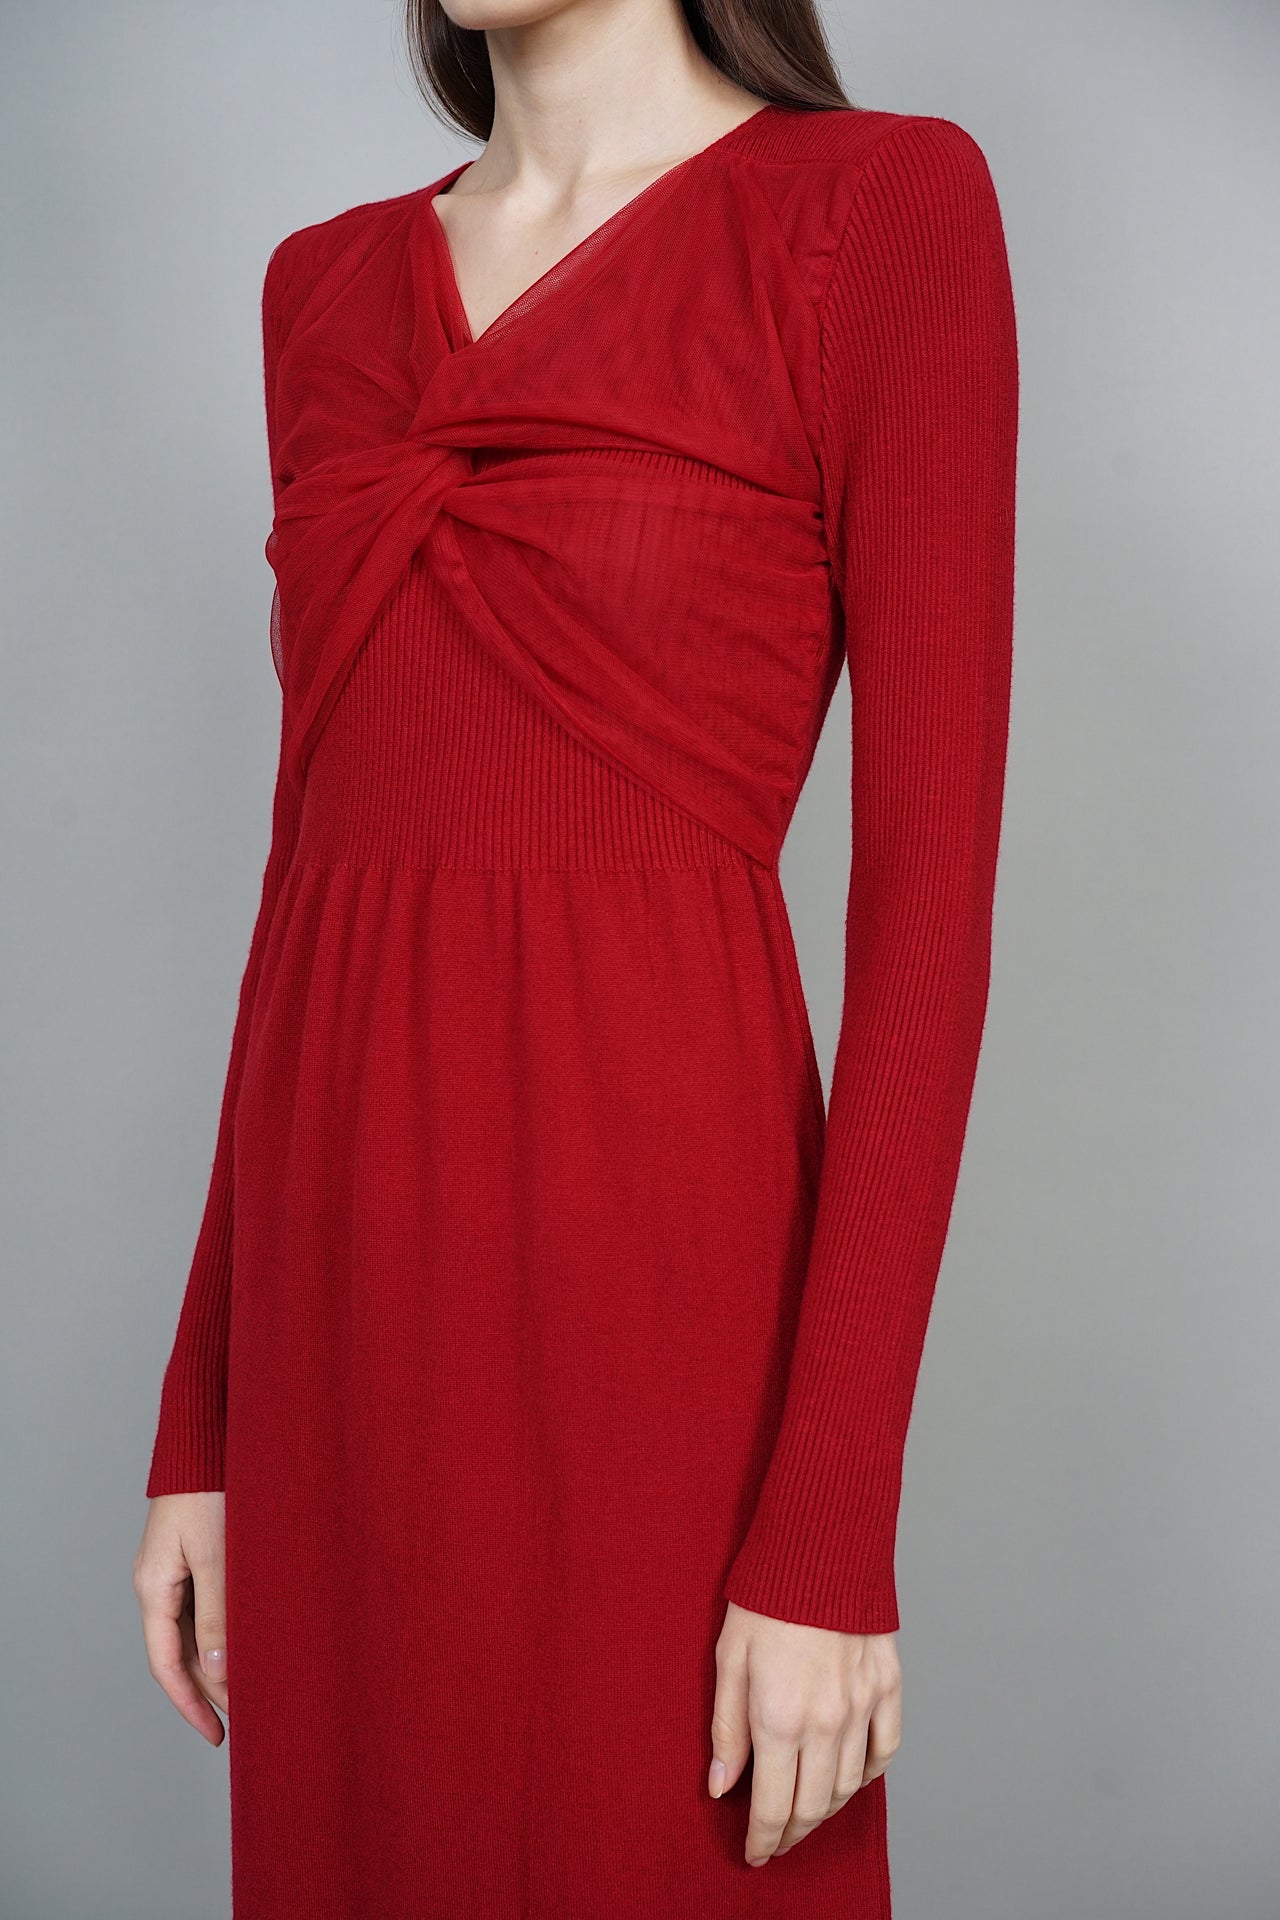 EVERYDAY / Lucca Twist Knot Midi Dress in Red